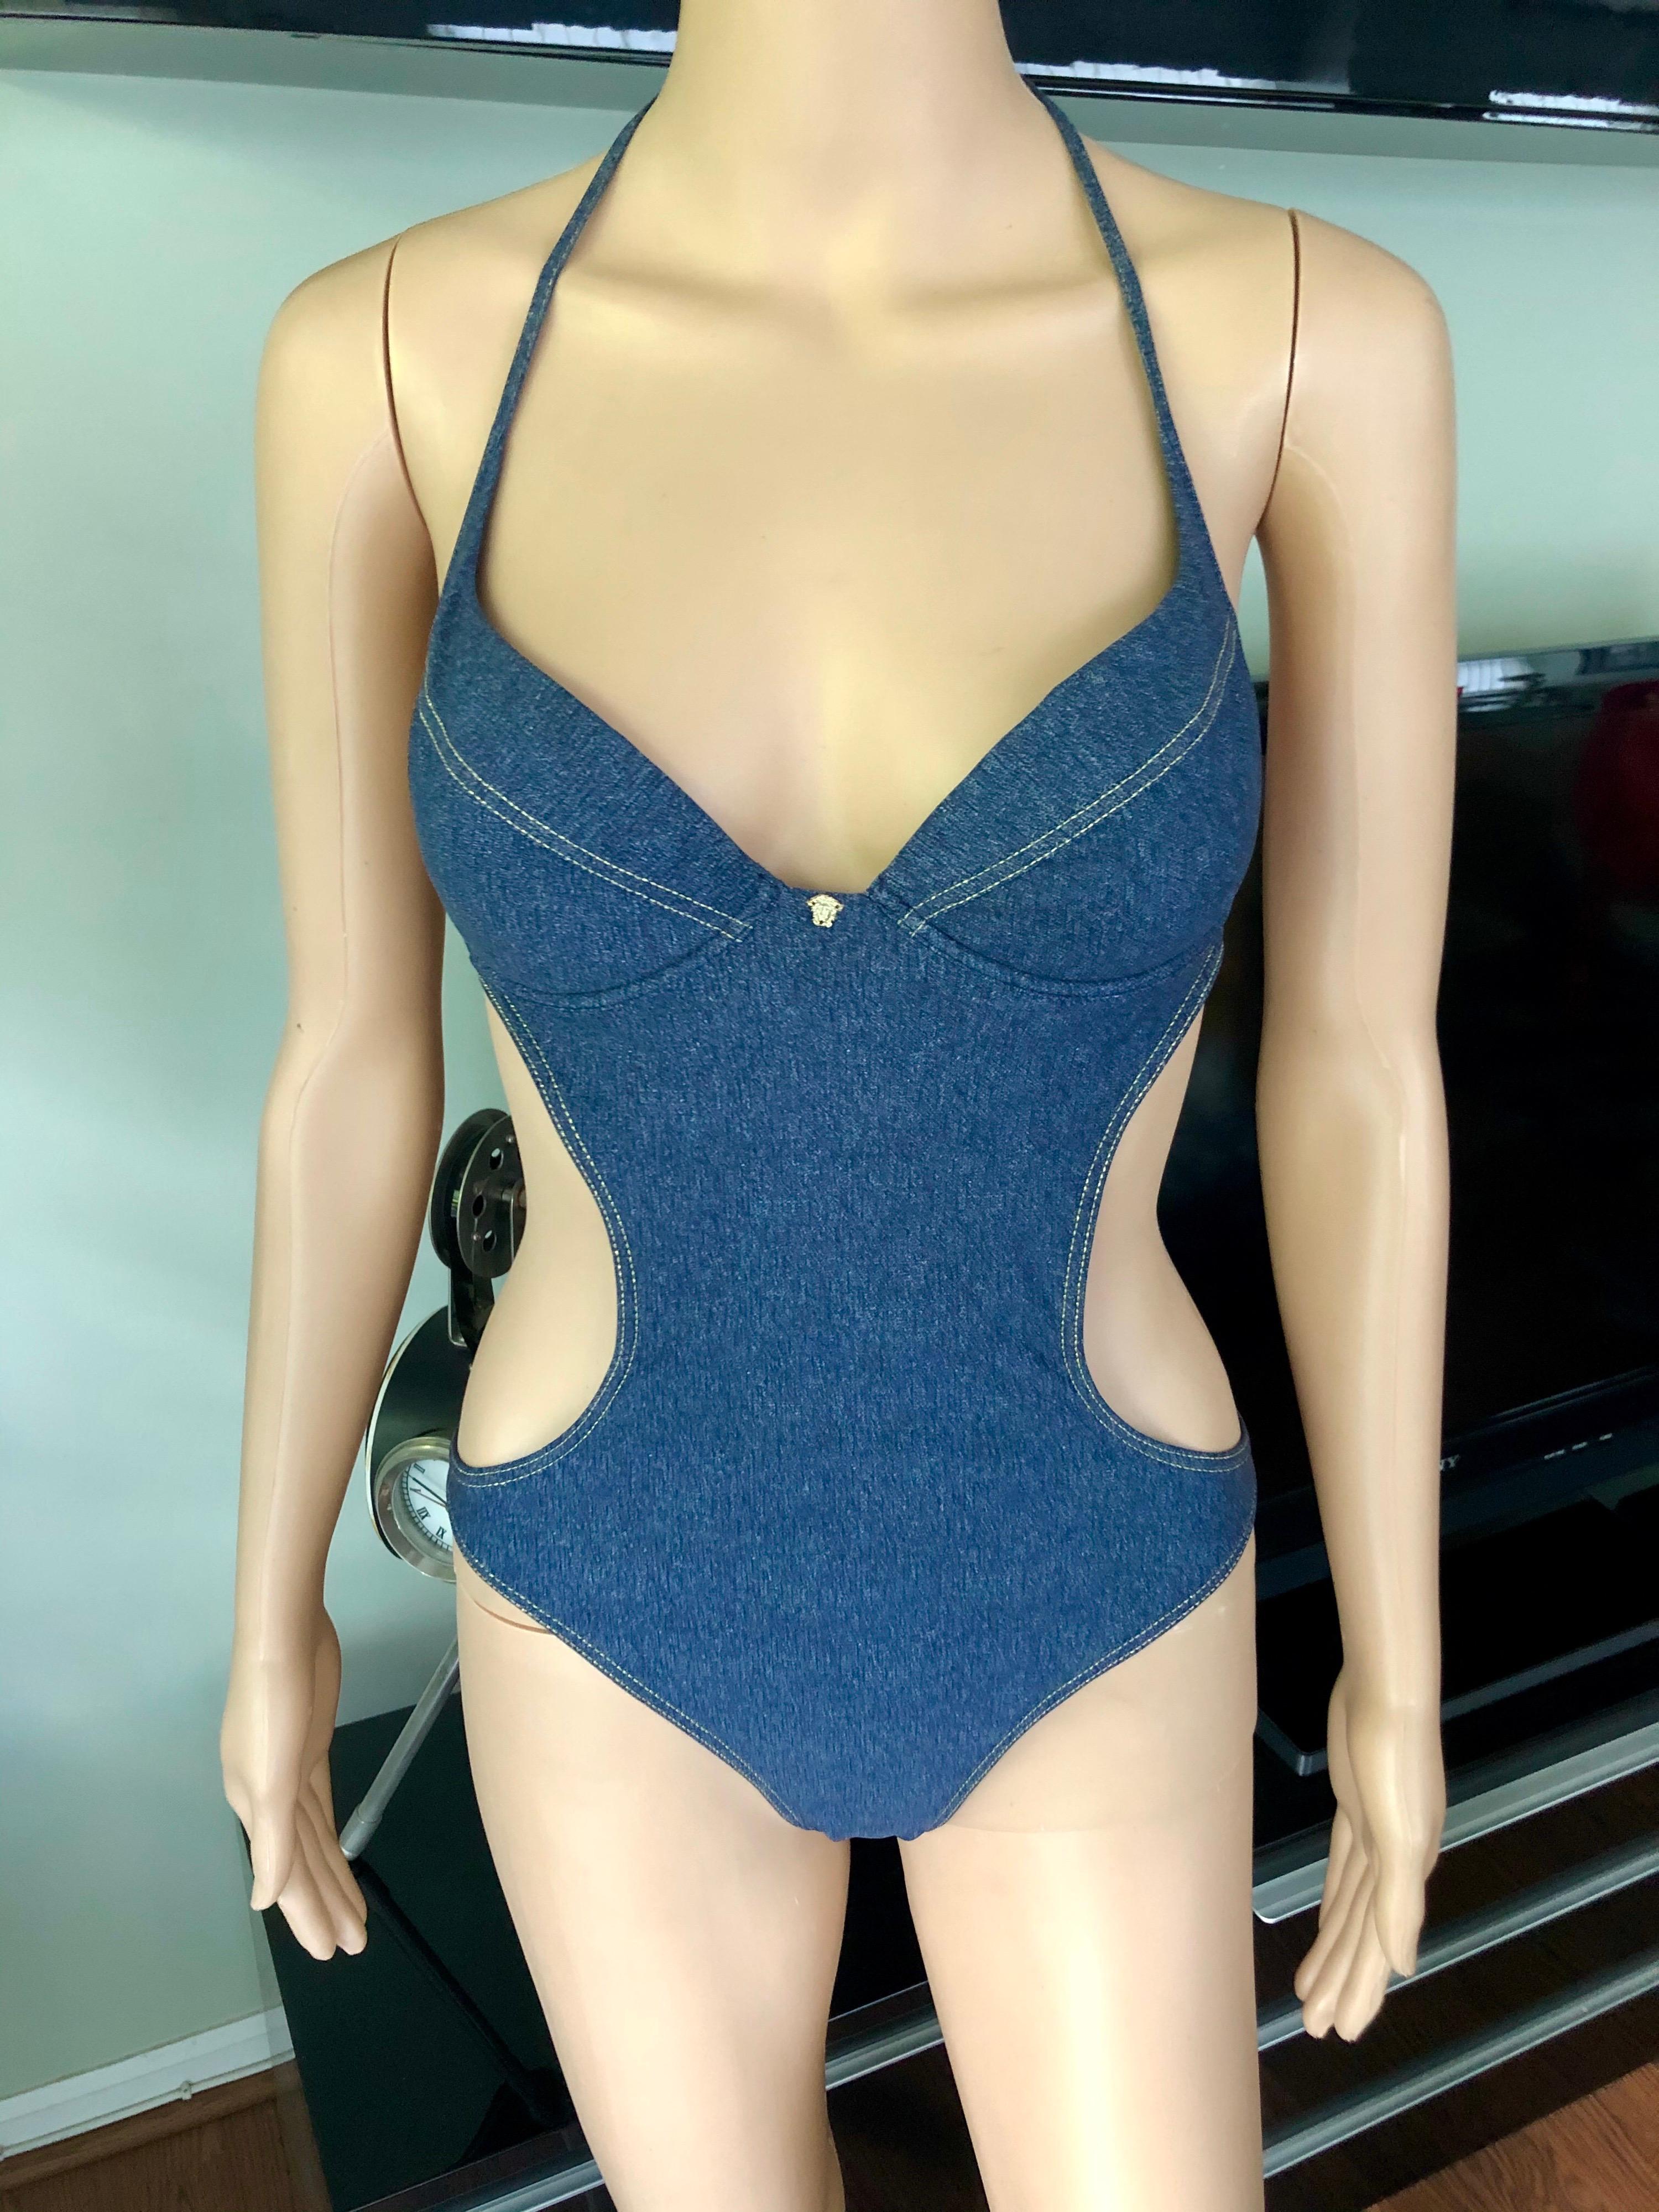 Versace Bustier Plunging Open Back Cutout Denim Print Swimwear Swimsuit IT 44
Excellent Condition. Like New.